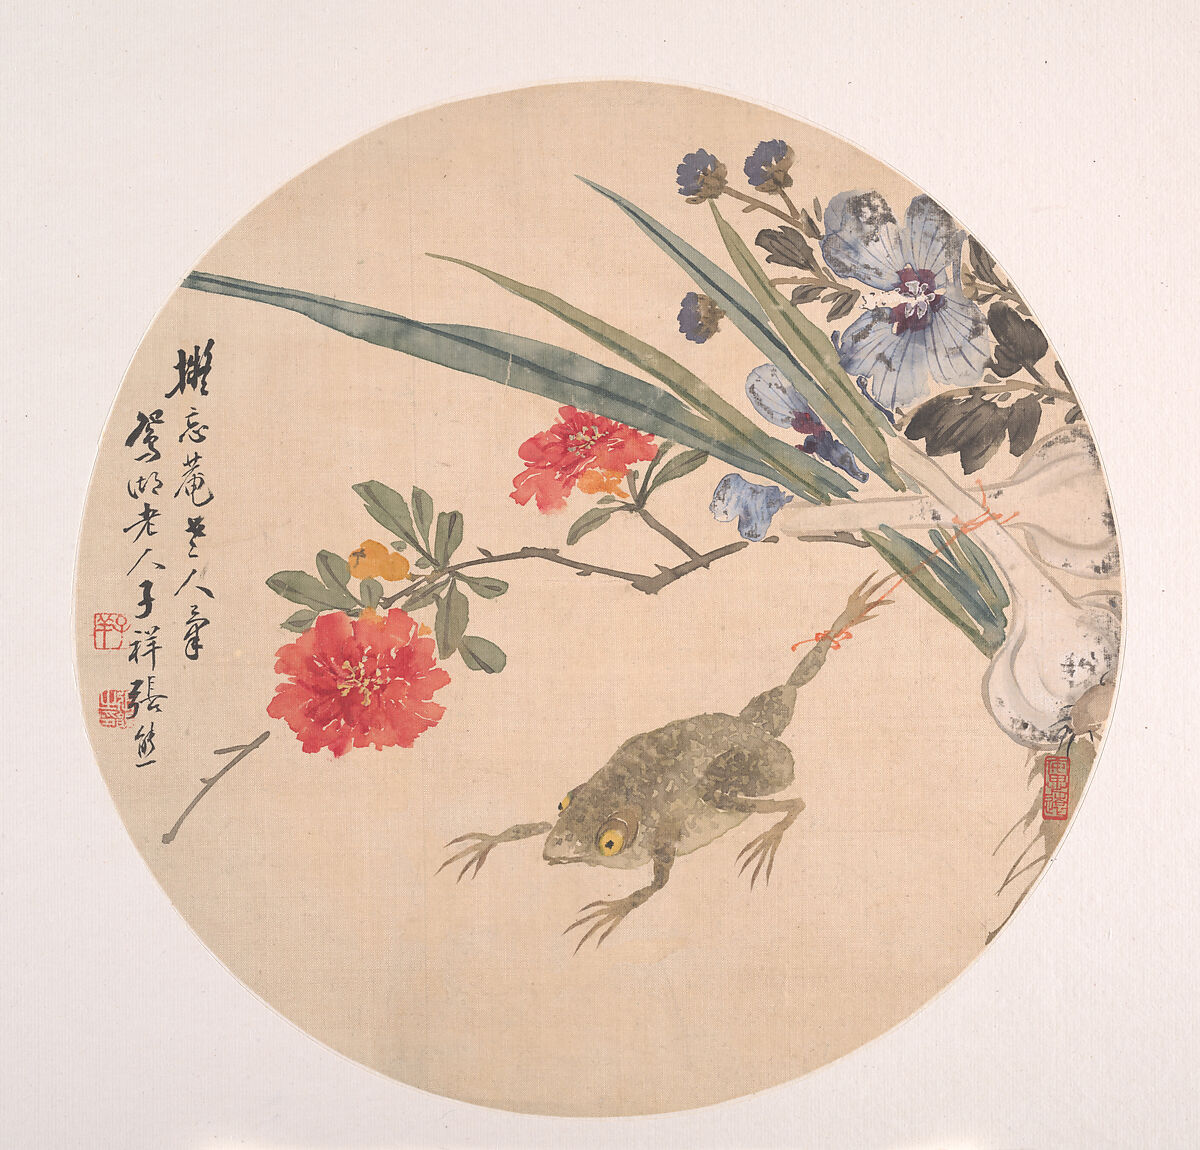 Zhang Xiong Flower And Toad China Qing Dynasty 16441911 The Metropolitan Museum Of Art